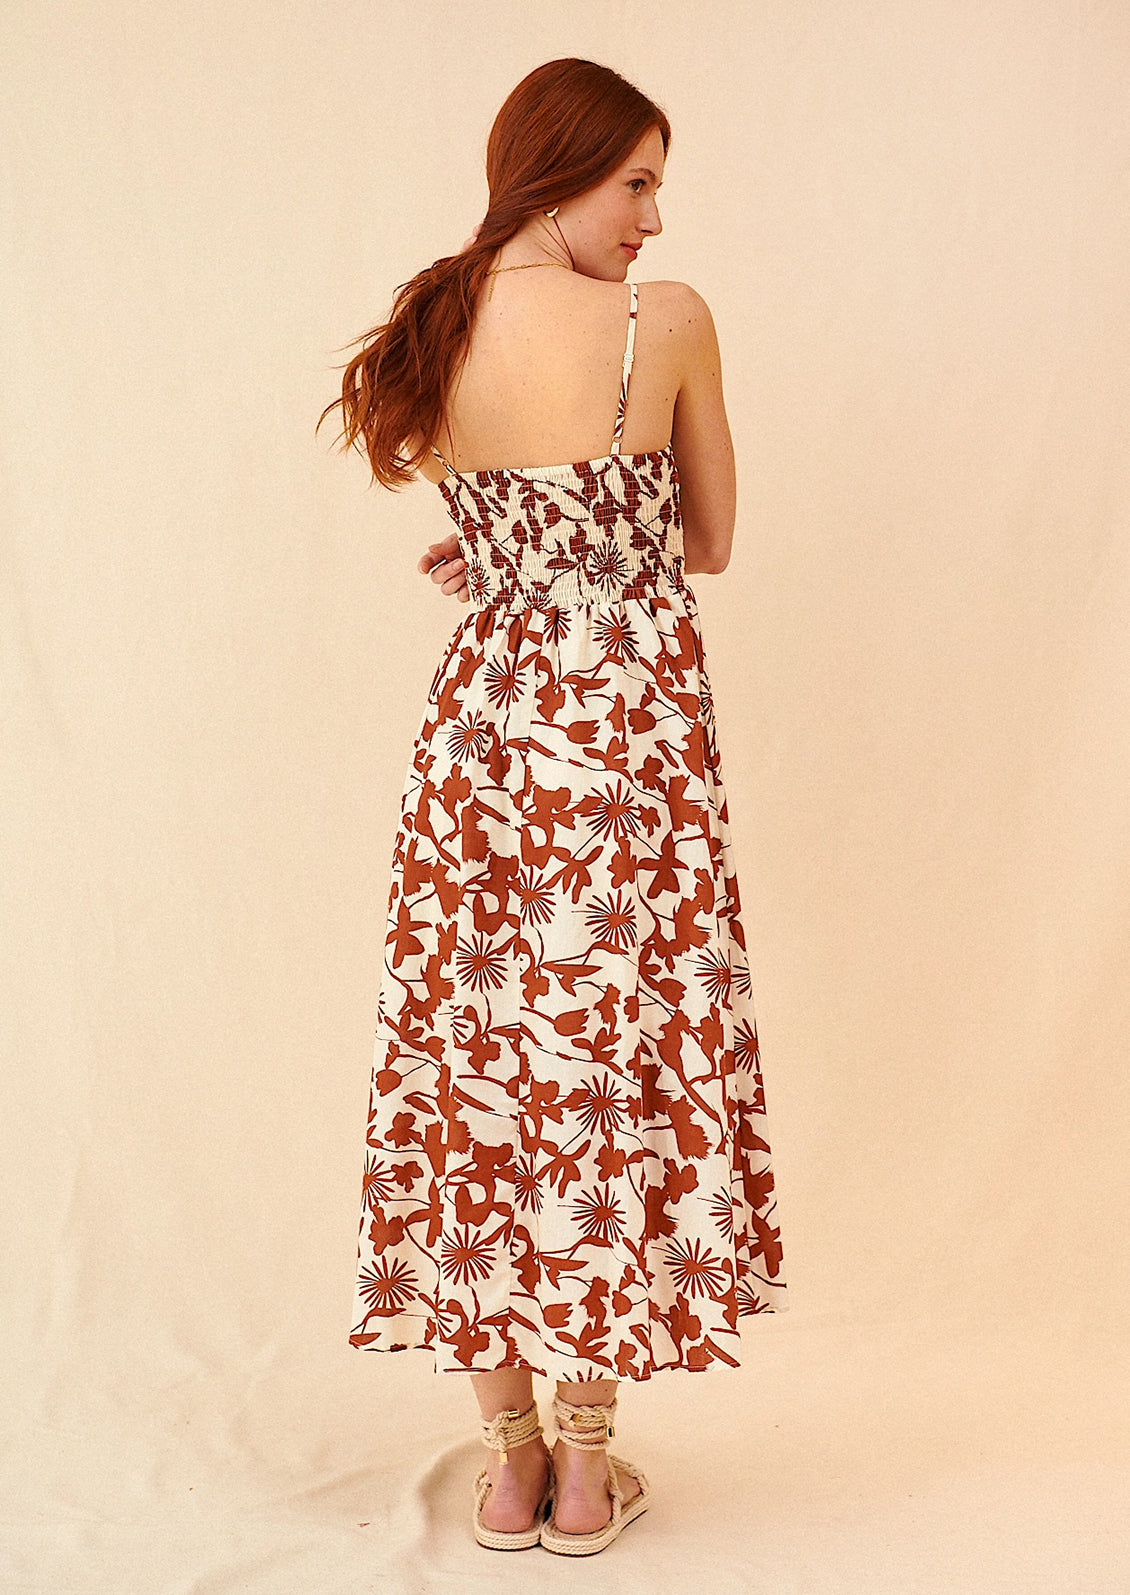 A woman wearing a sleeveless spaghetti strap dress in brown and white botanical print.